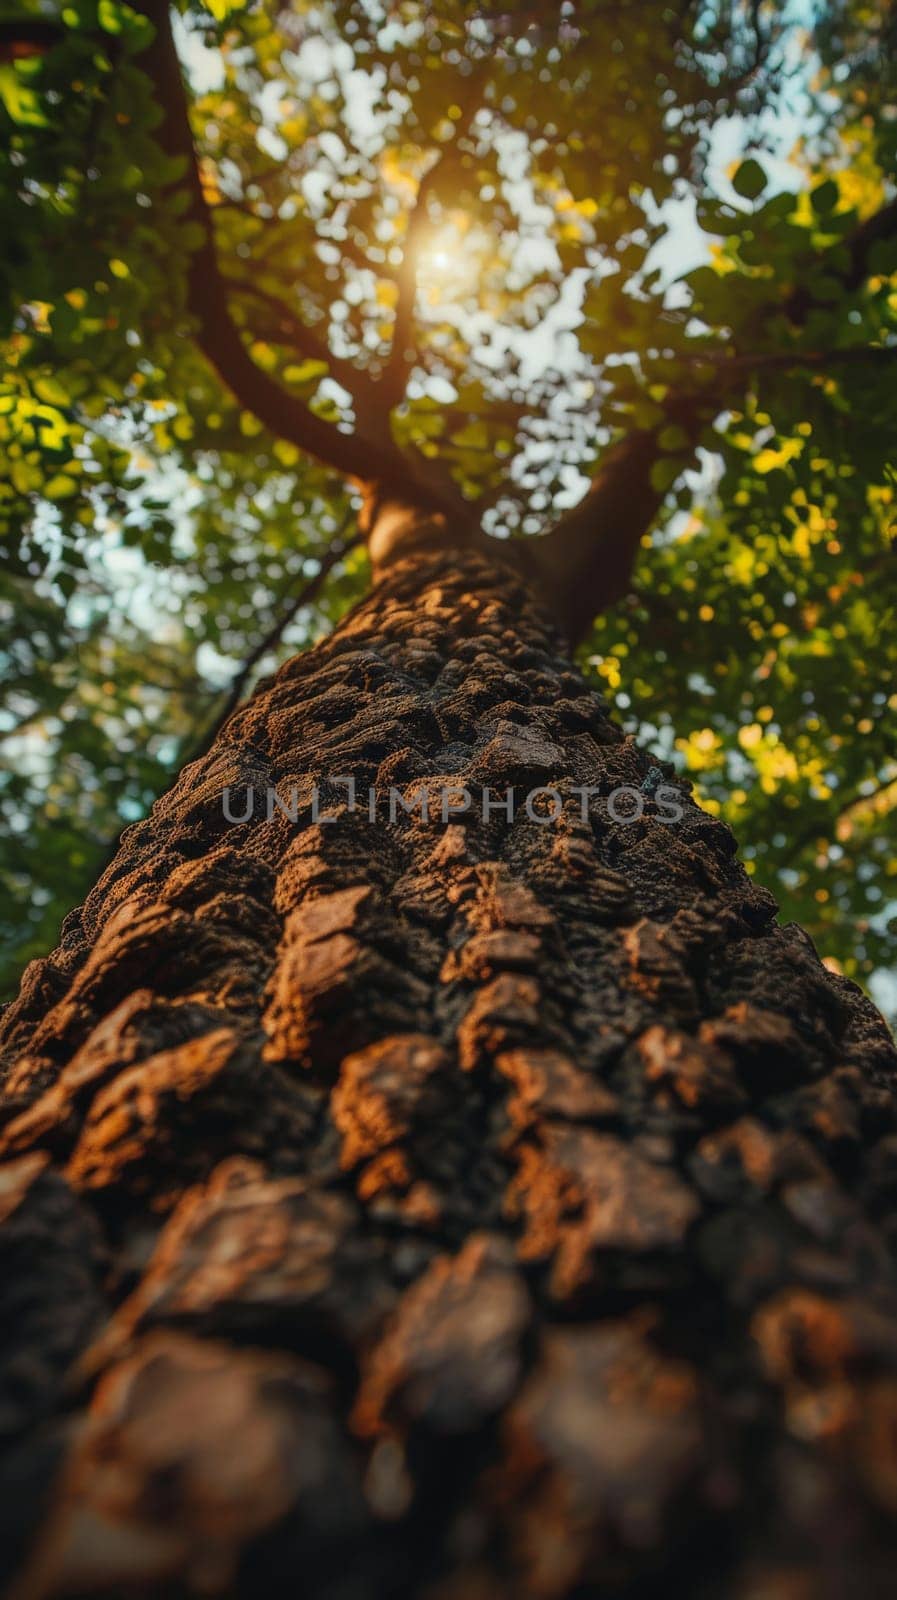 low angle shot photo of a tree, detail and abstract texture of old tree bark.